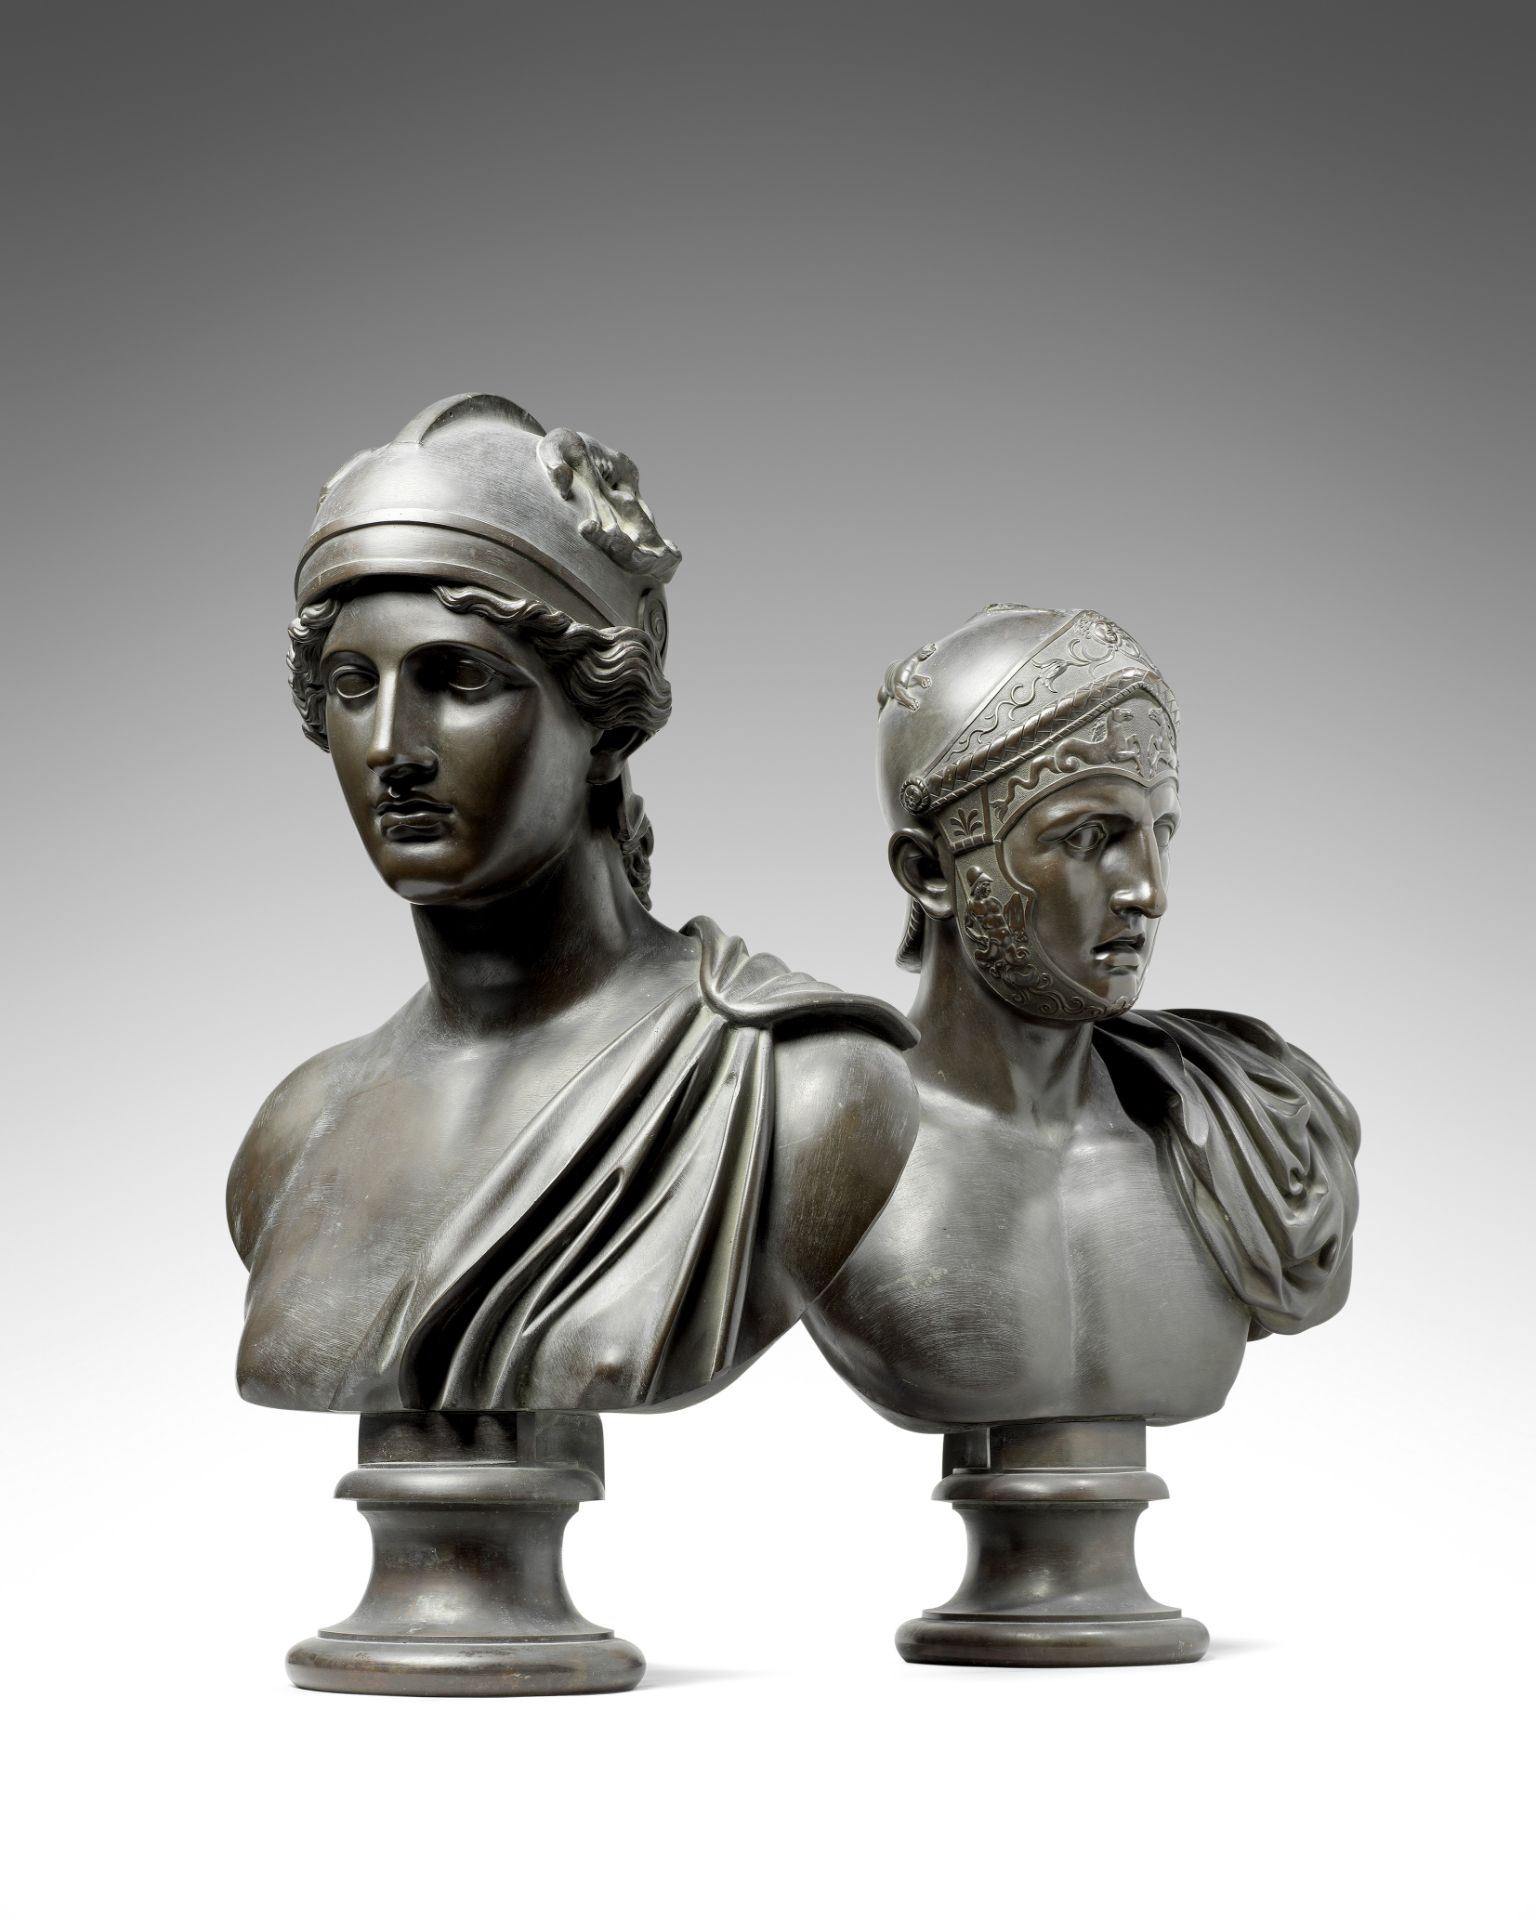 A pair of important late 18th/early 19th century Neoclassical bronze busts of Achilles and Roma